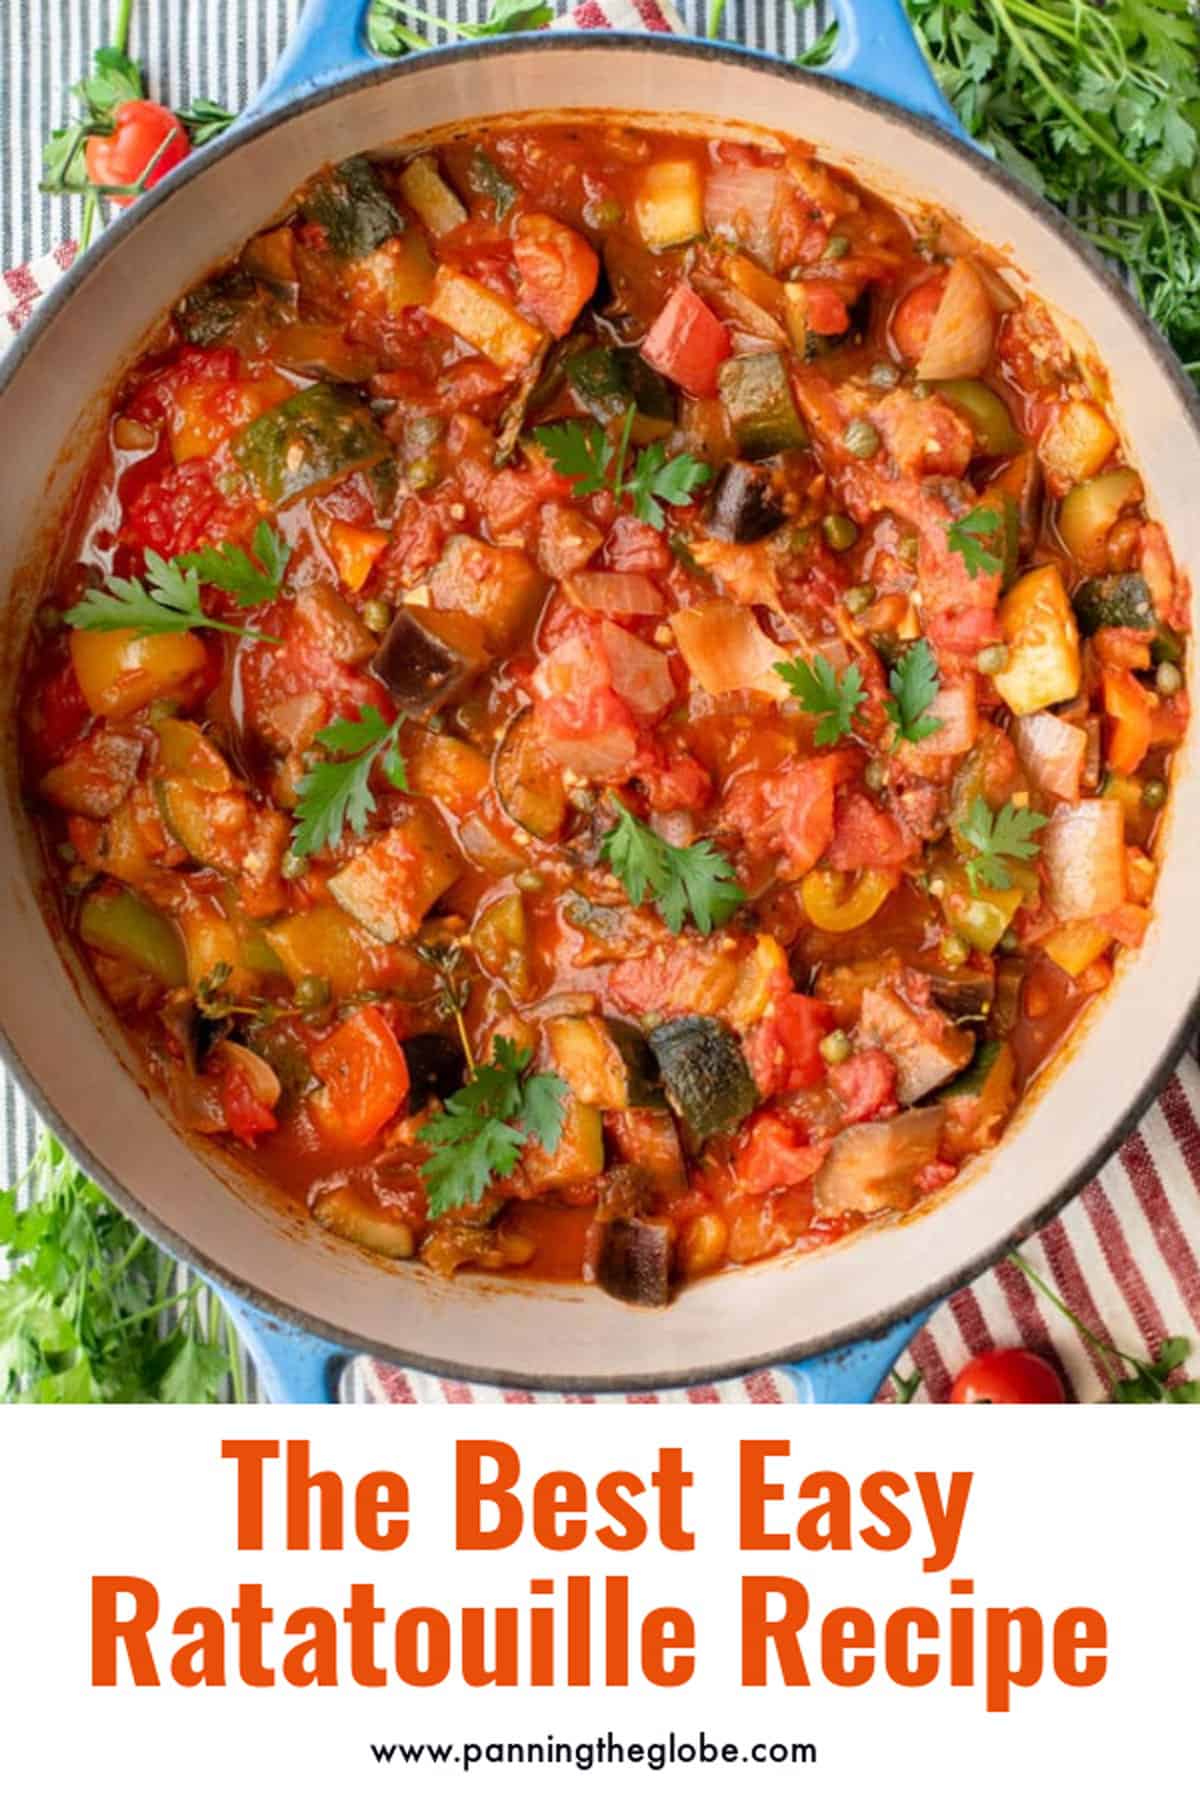 The Best Easy Ratatouille Recipe - Panning The Globe